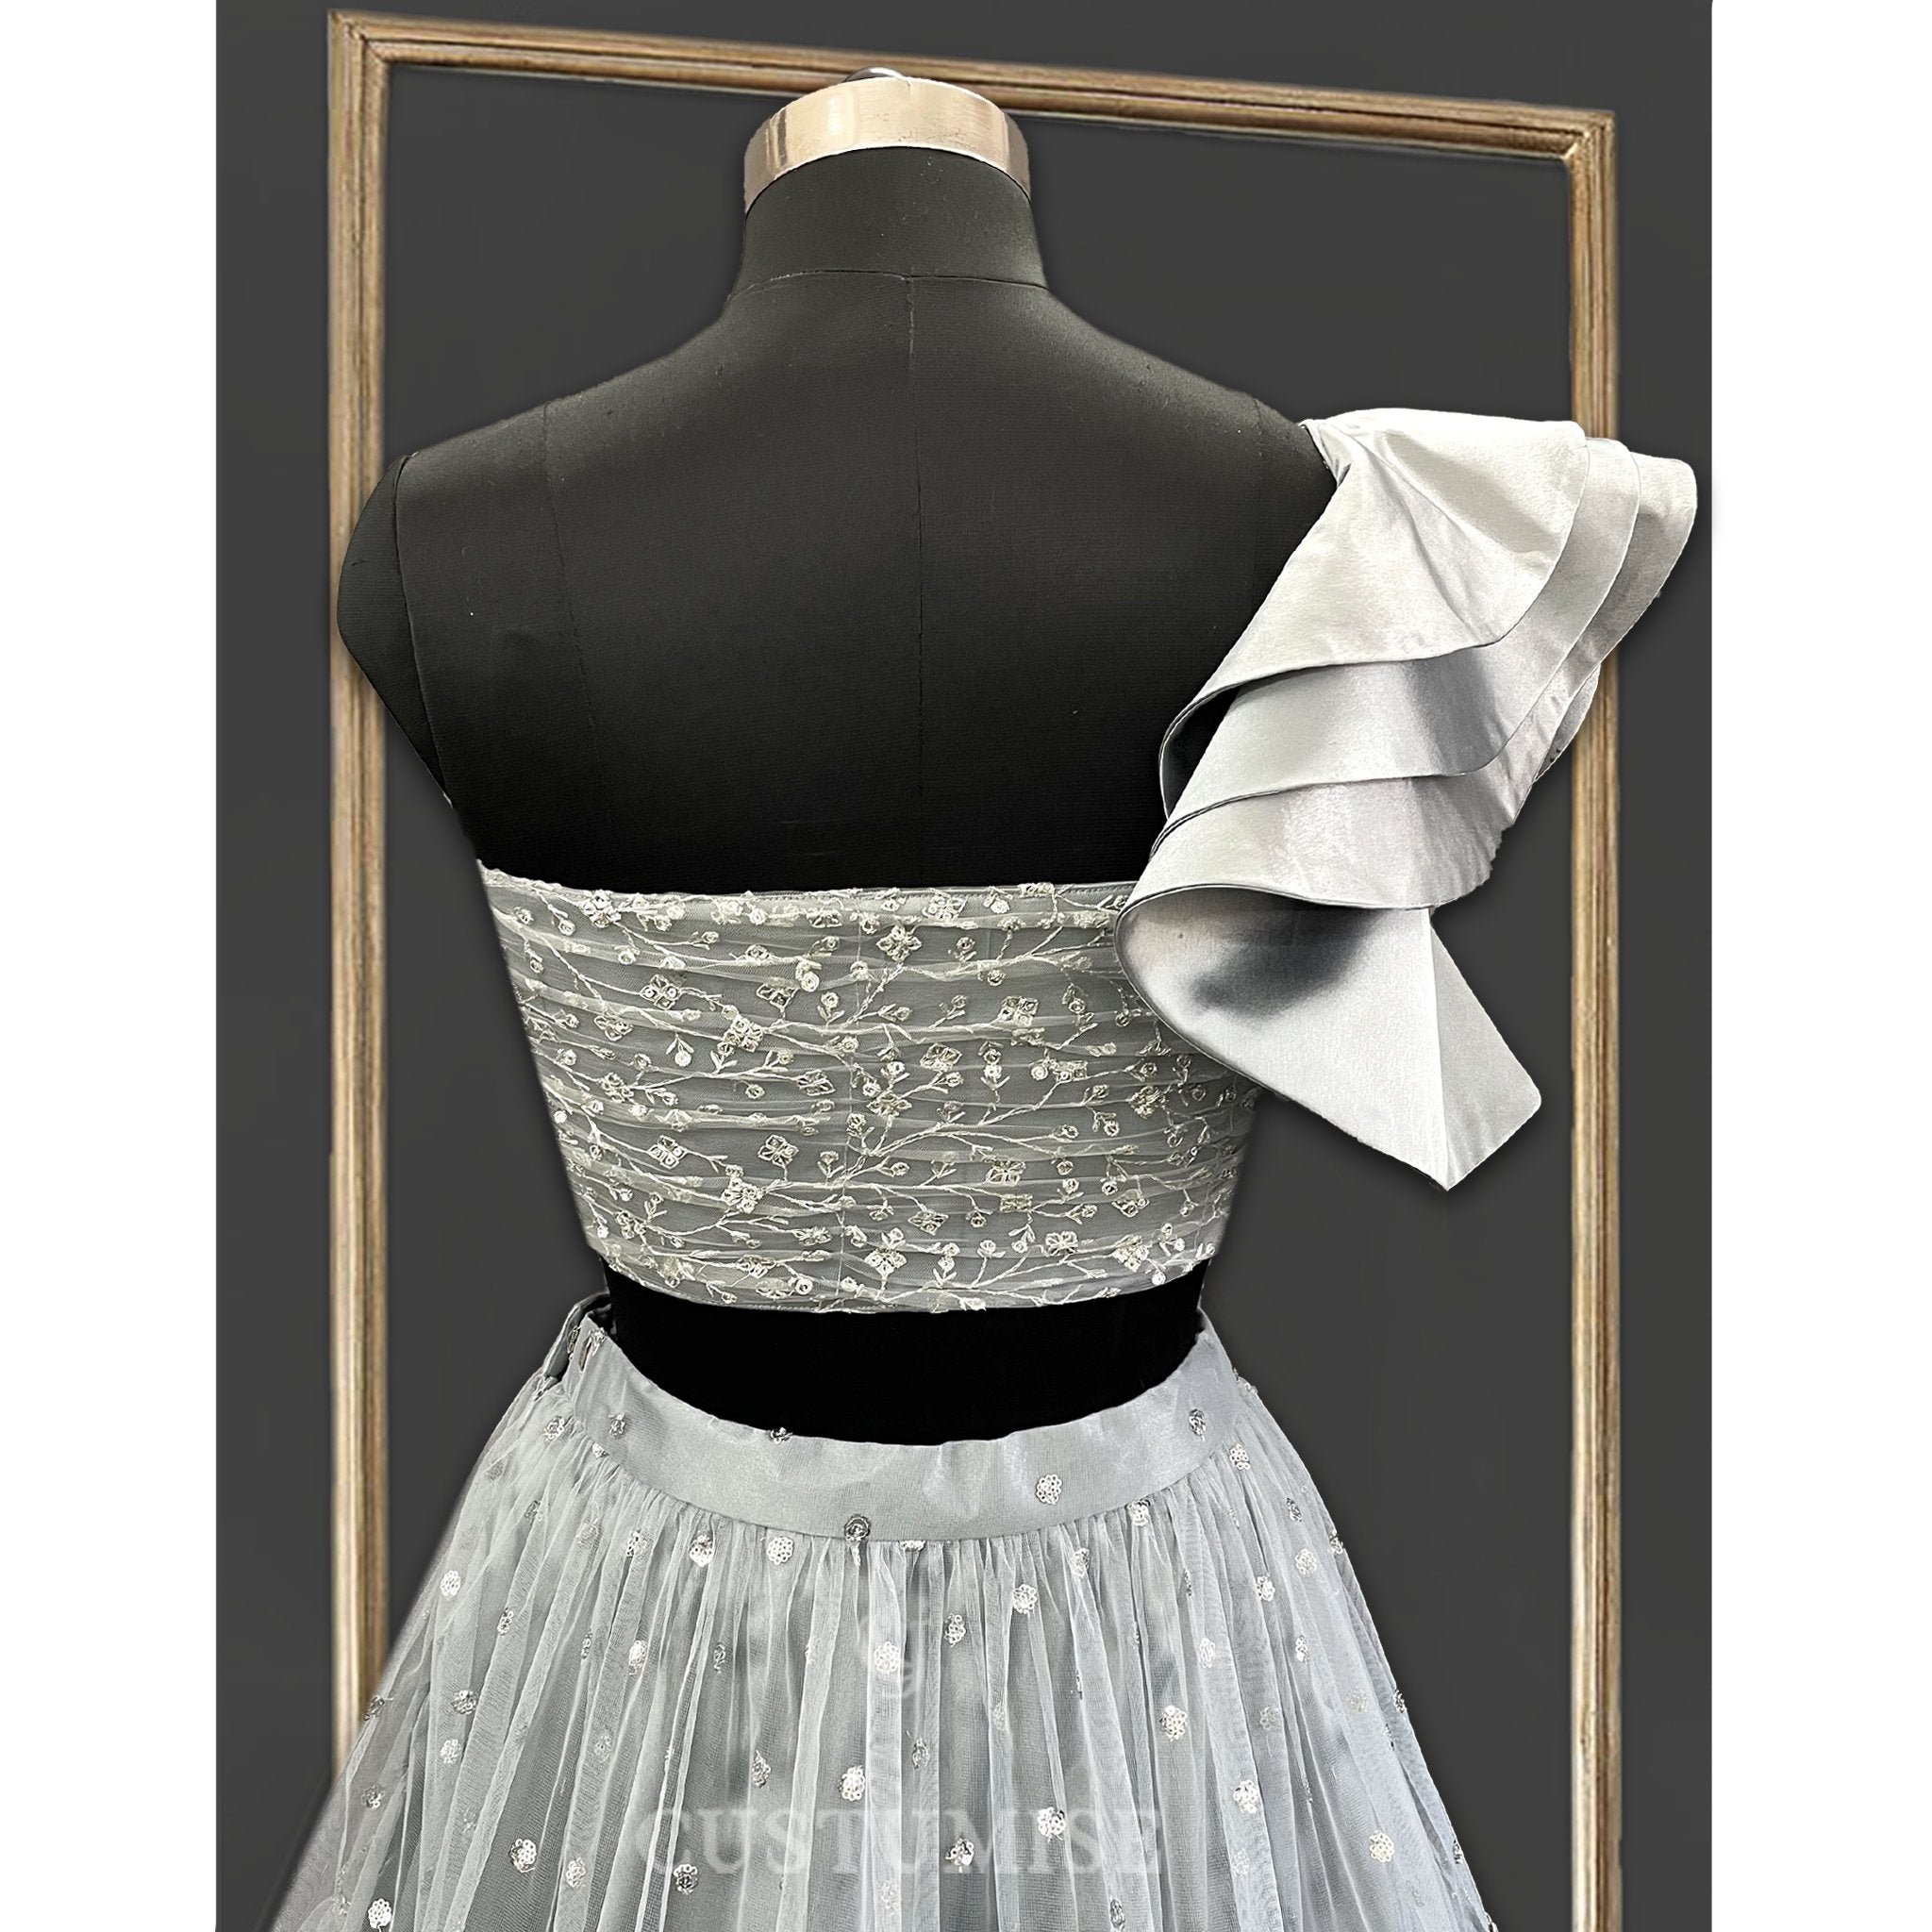 Grey 3 Tiered Skirt with One Shoulder Ruffled Sleeves Top - Indian Designer Bridal Wedding Outfit